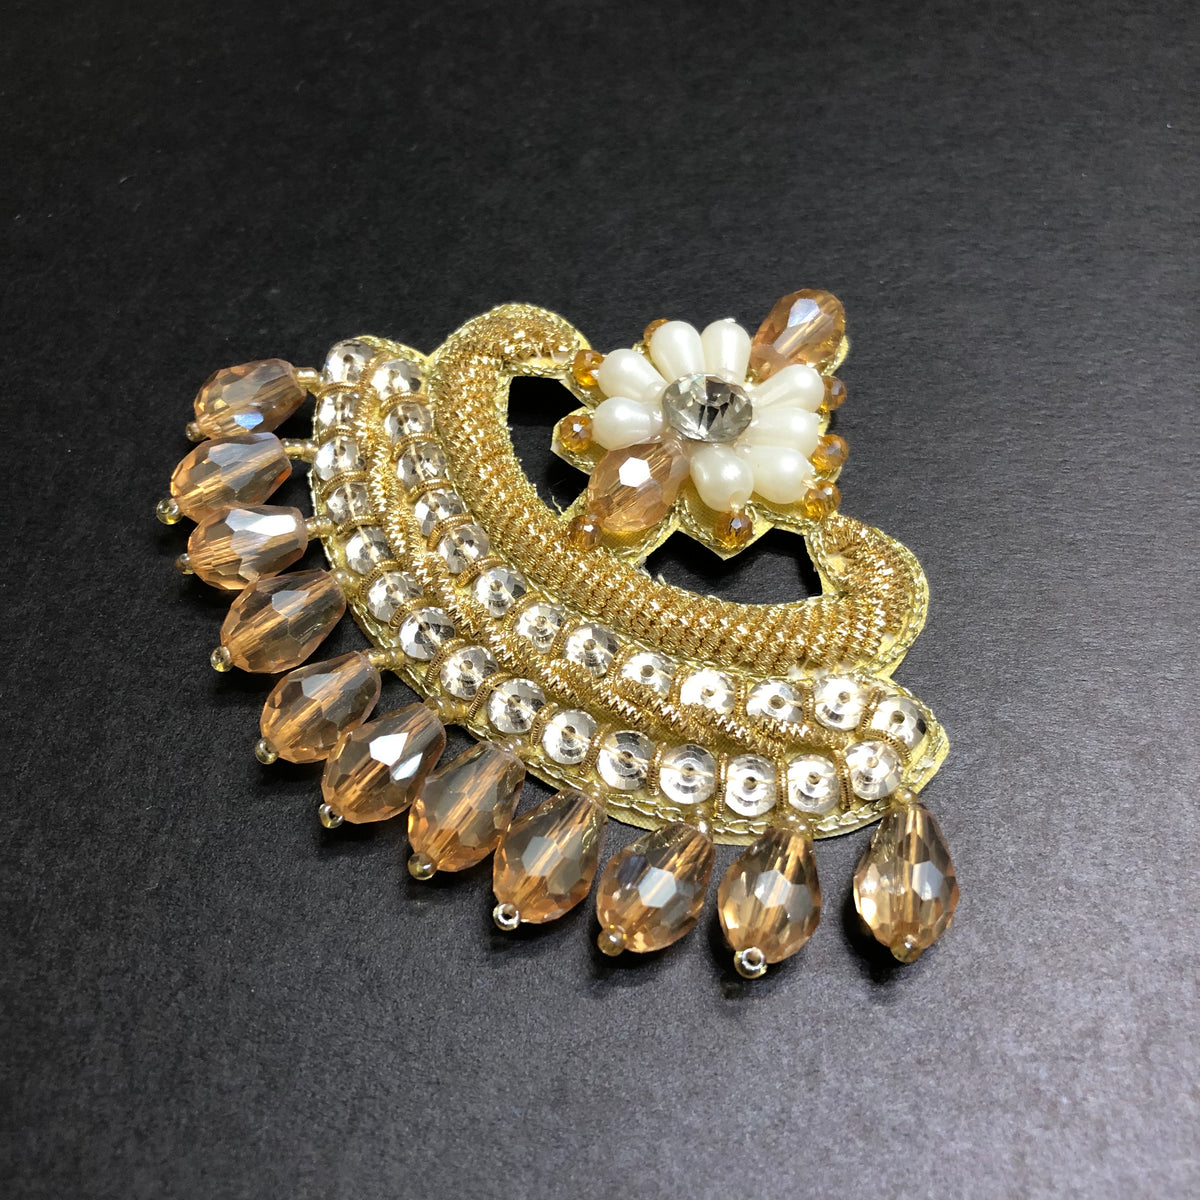 Signature Off-white Pearls with Champagne Crystals Golden Motif